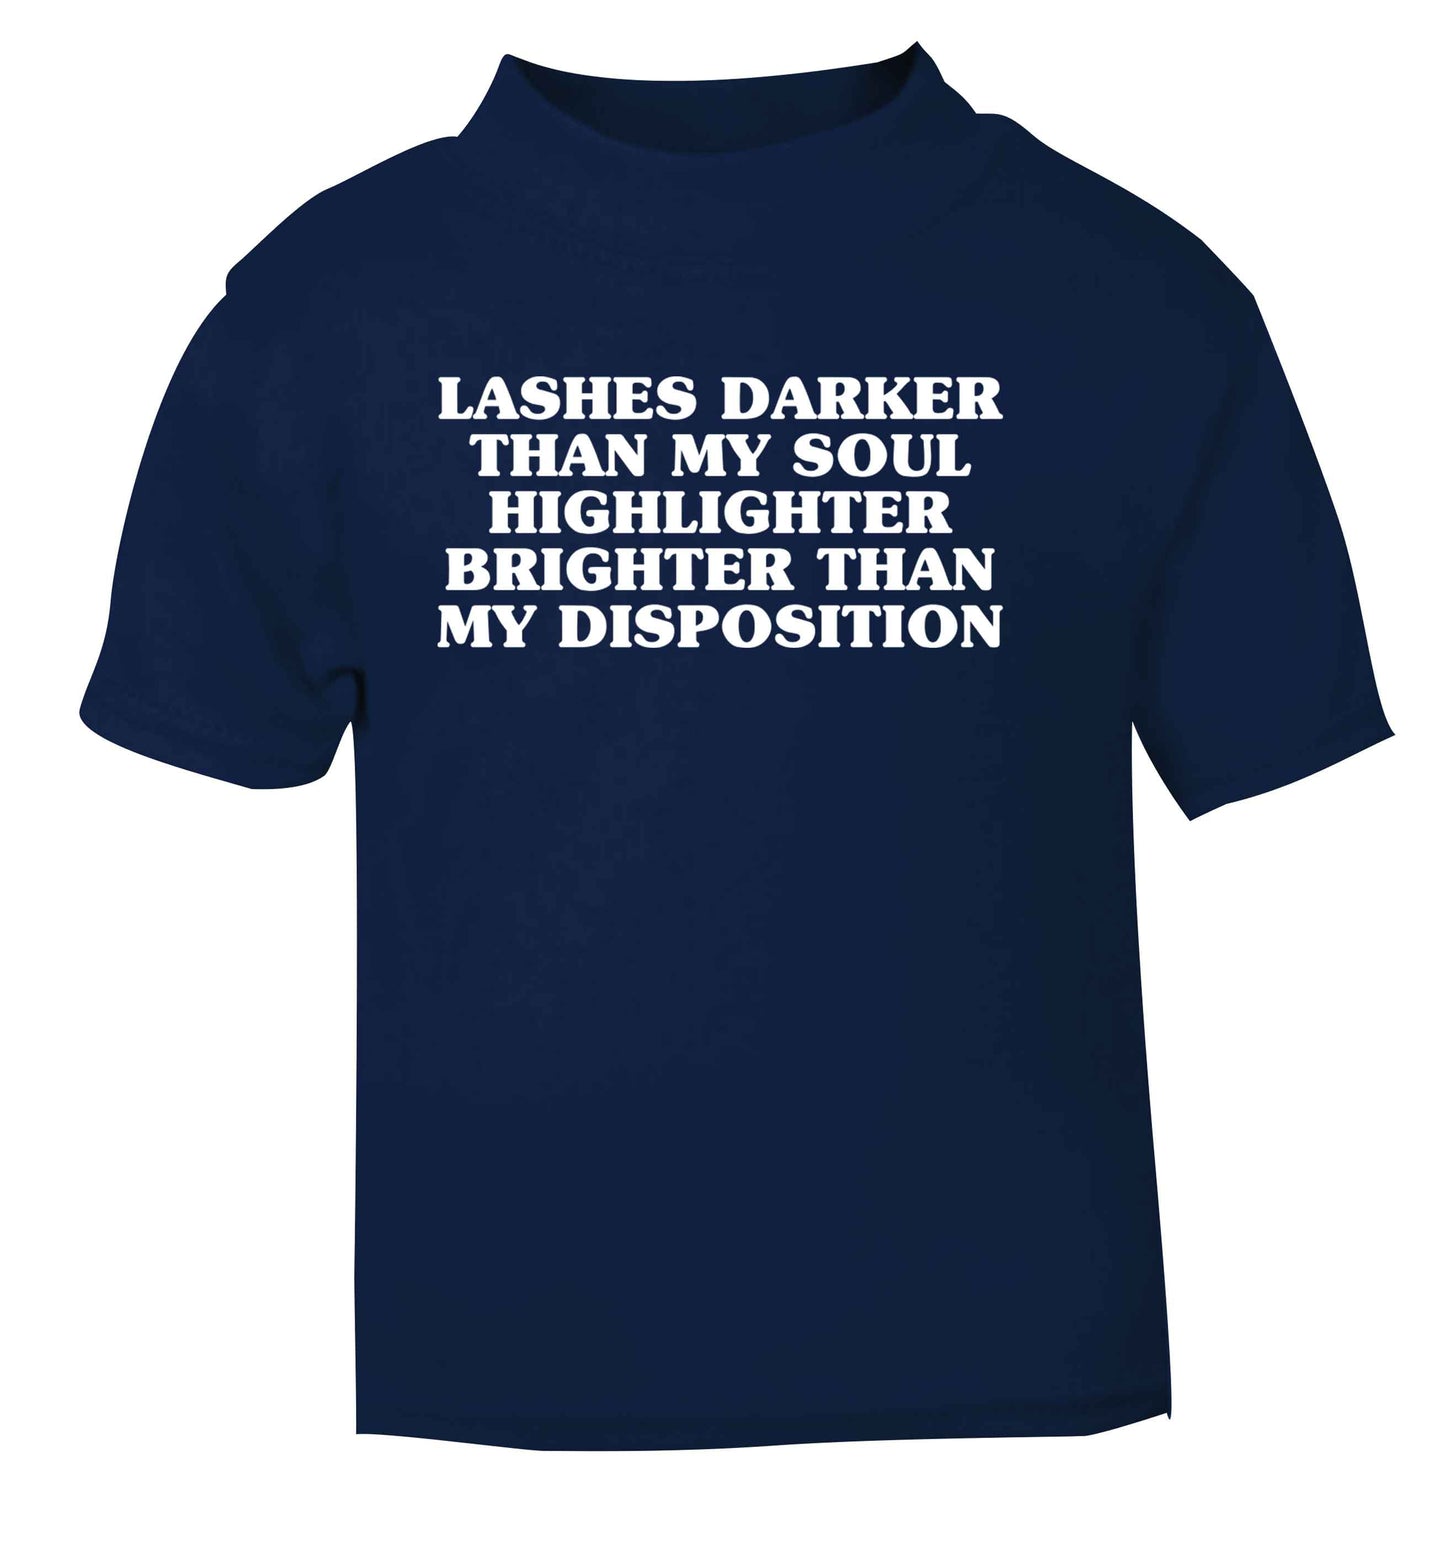 Lashes darker than my soul, highlighter brighter than my disposition navy Baby Toddler Tshirt 2 Years